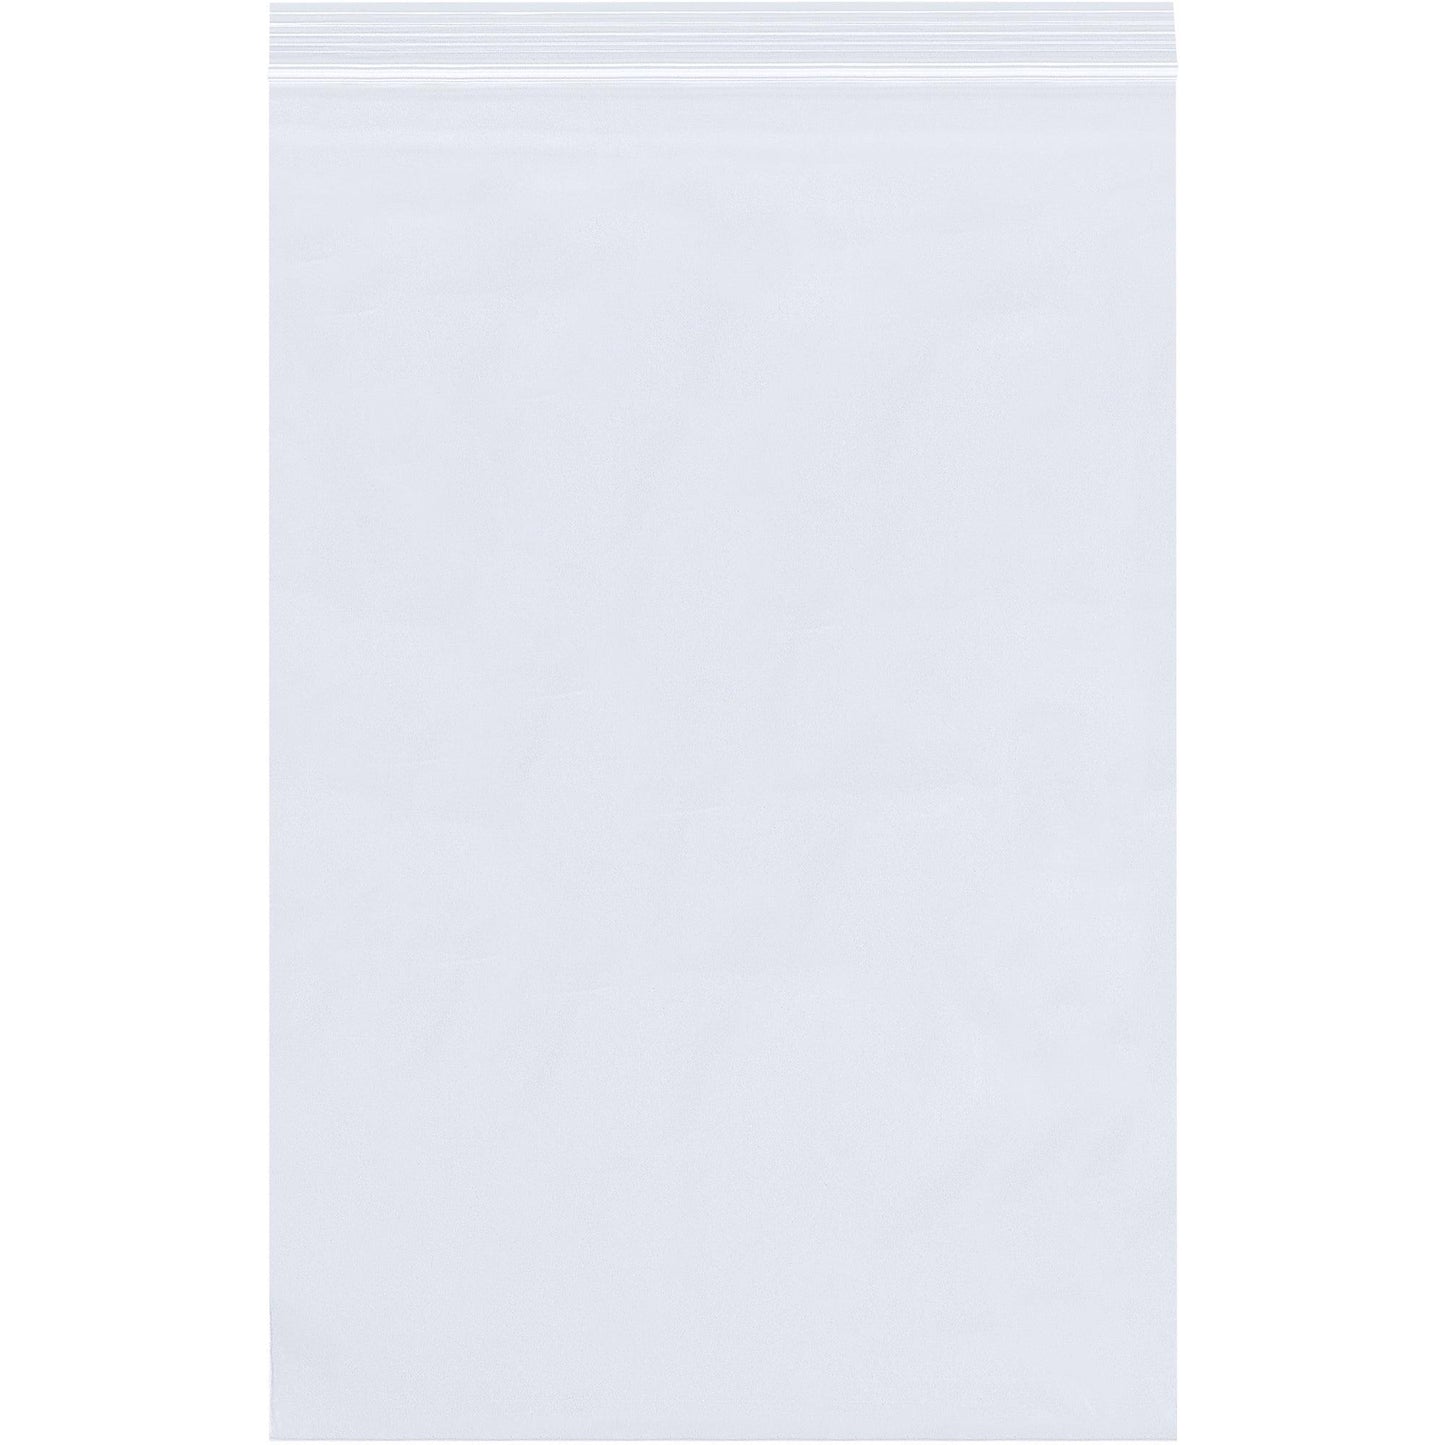 15 x 18" - 6 Mil Reclosable Poly Bags - PB3899